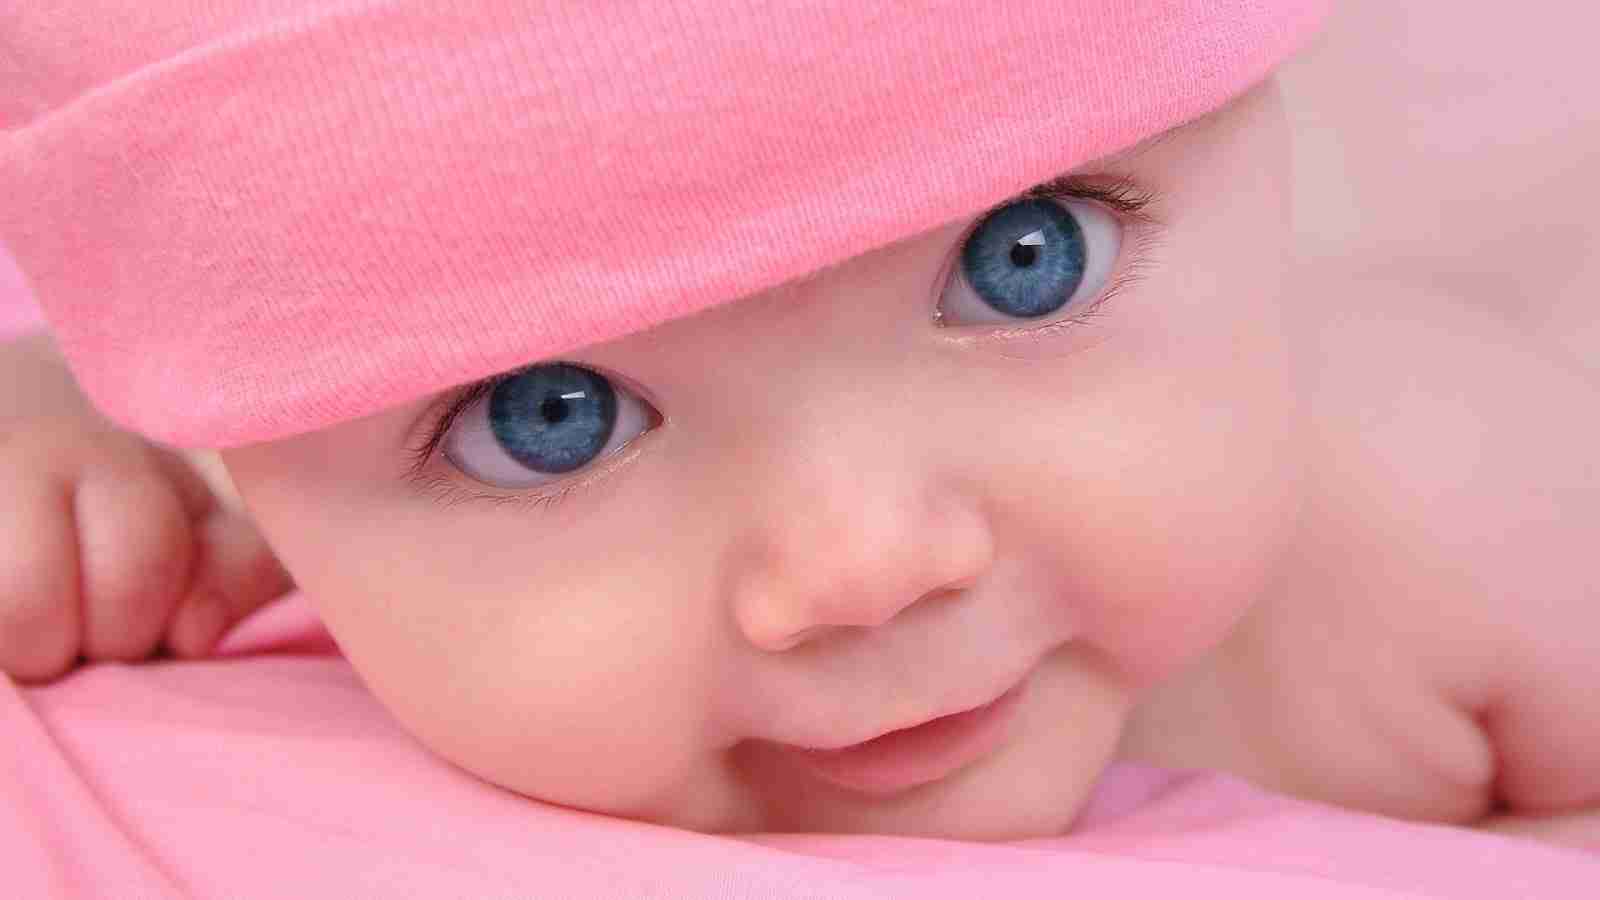 Cute baby images free download for mobile phone